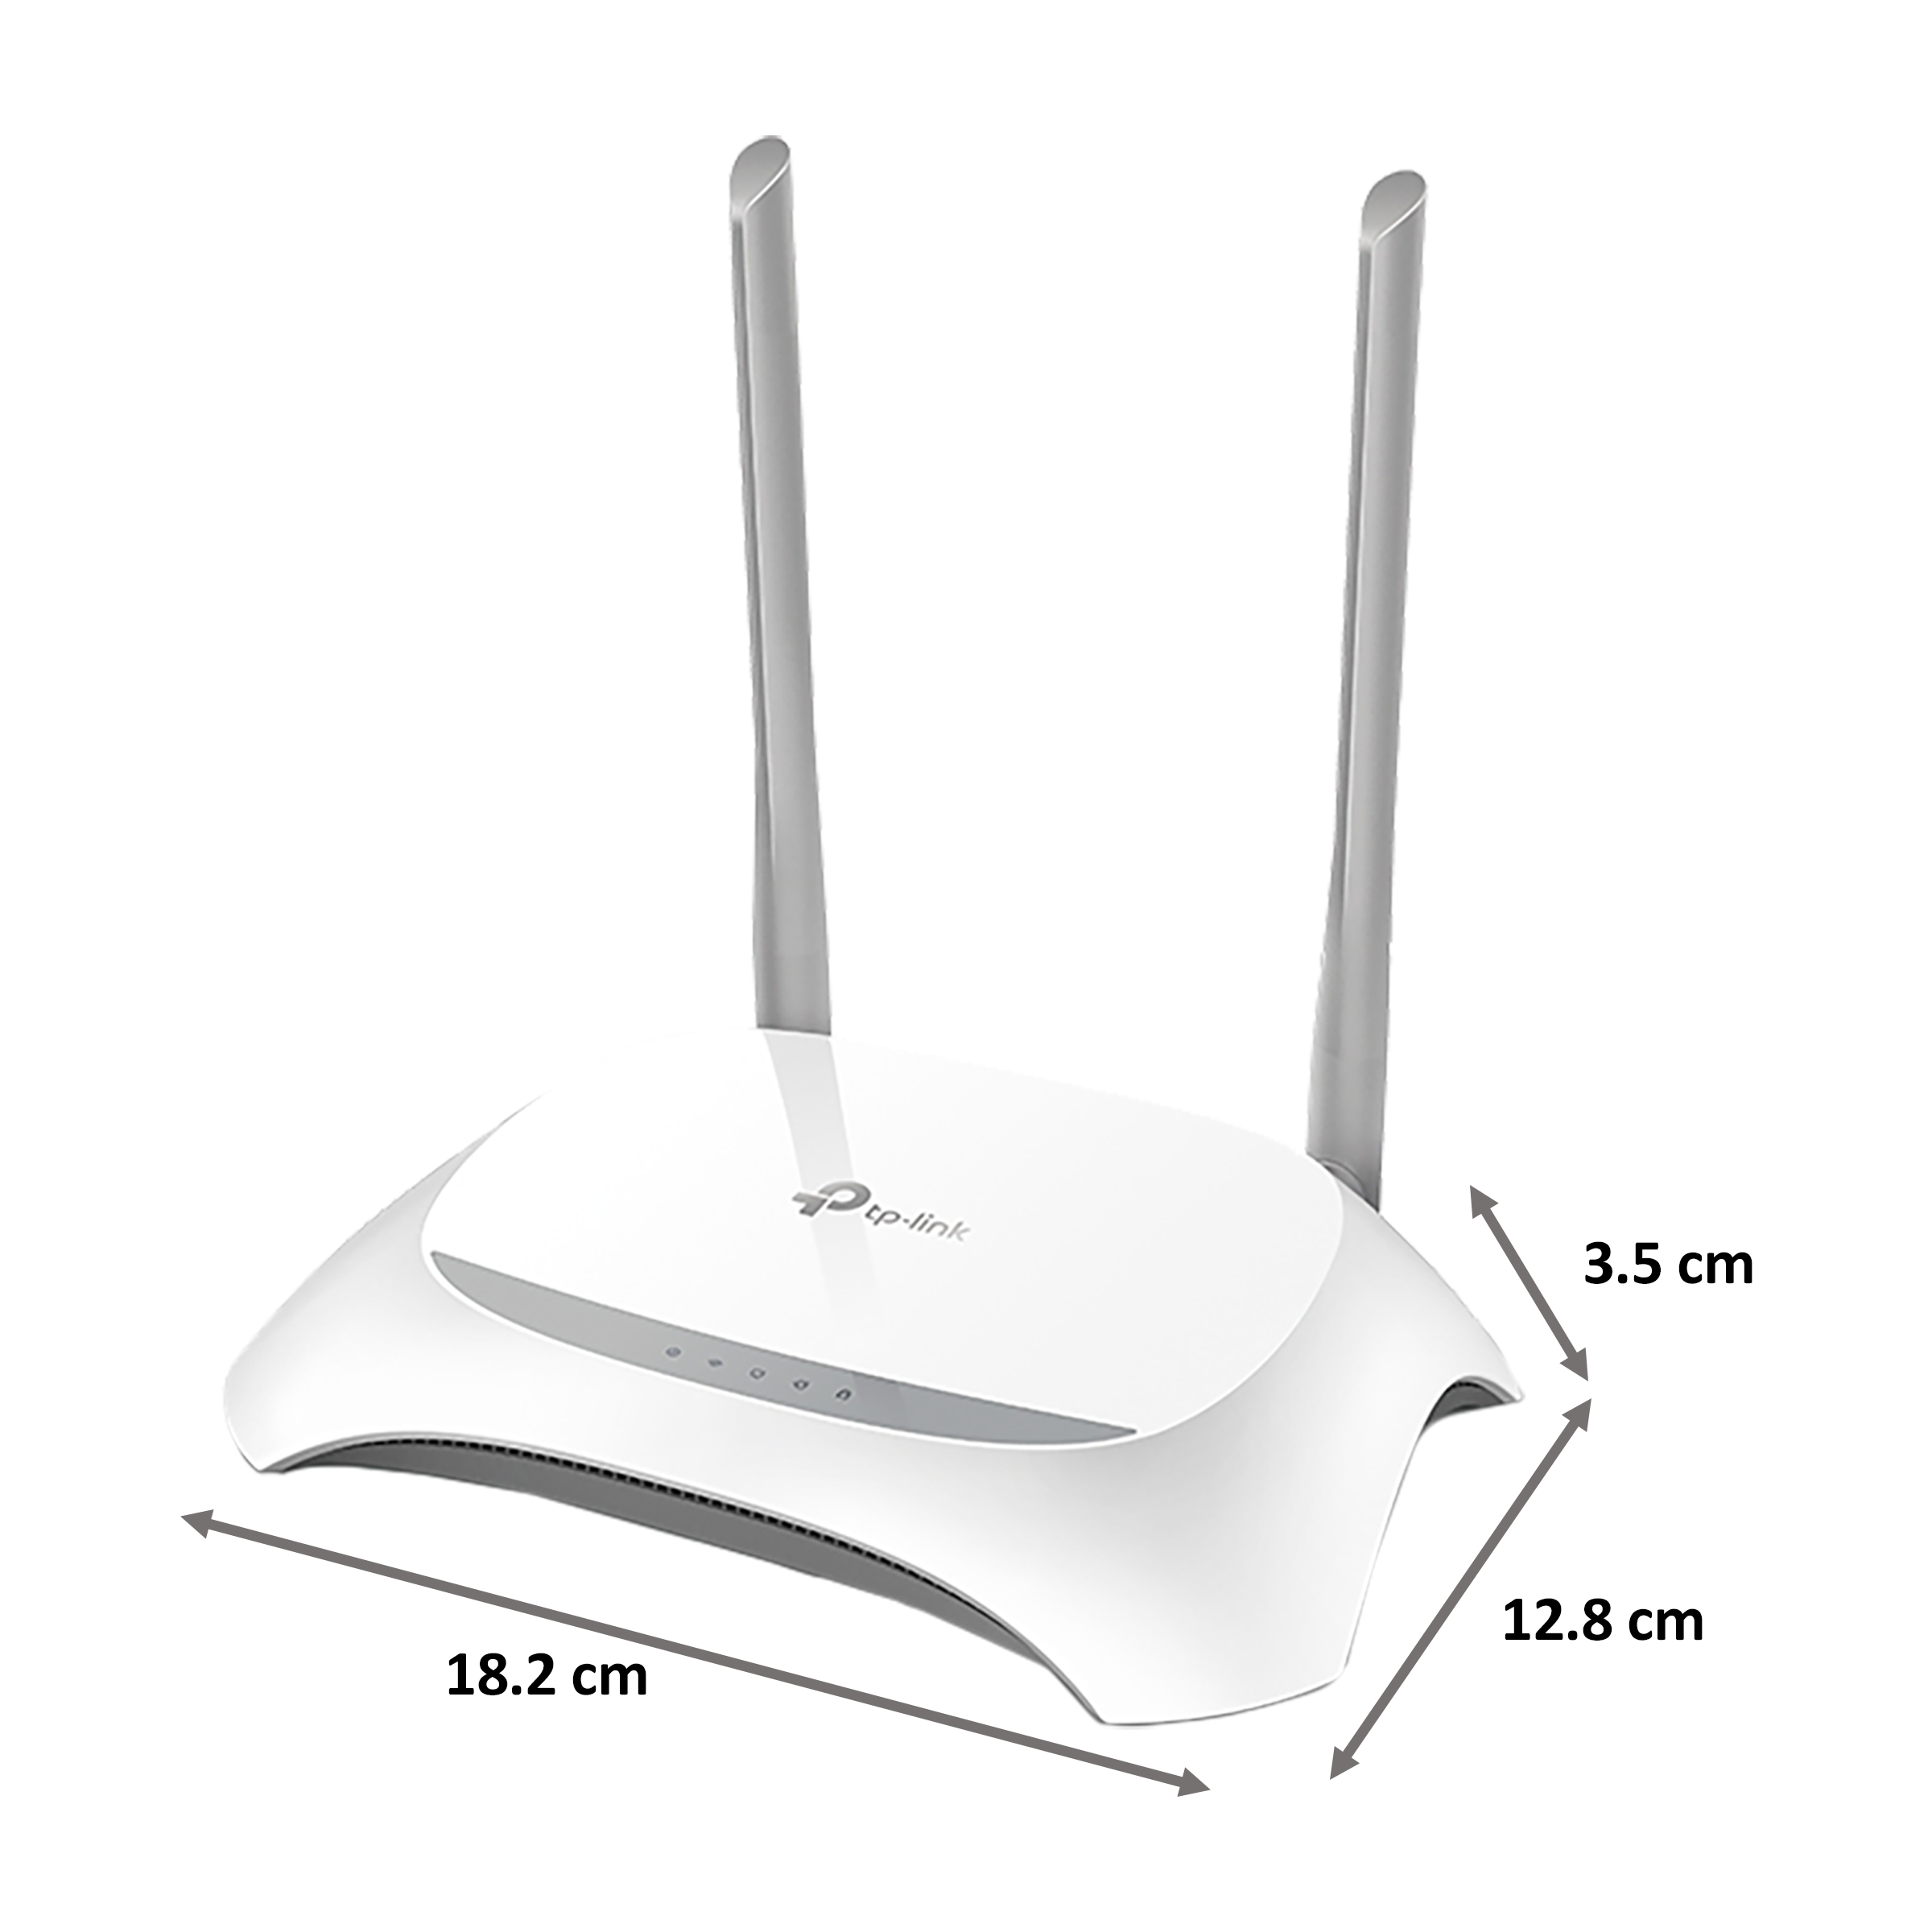 Buy Tp-Link TL-WR850N N300 Single Band Wi-Fi Router (2 Antennas, 4 LAN  Ports, Compatible With IPv6 , 450502429, White) Online - Croma